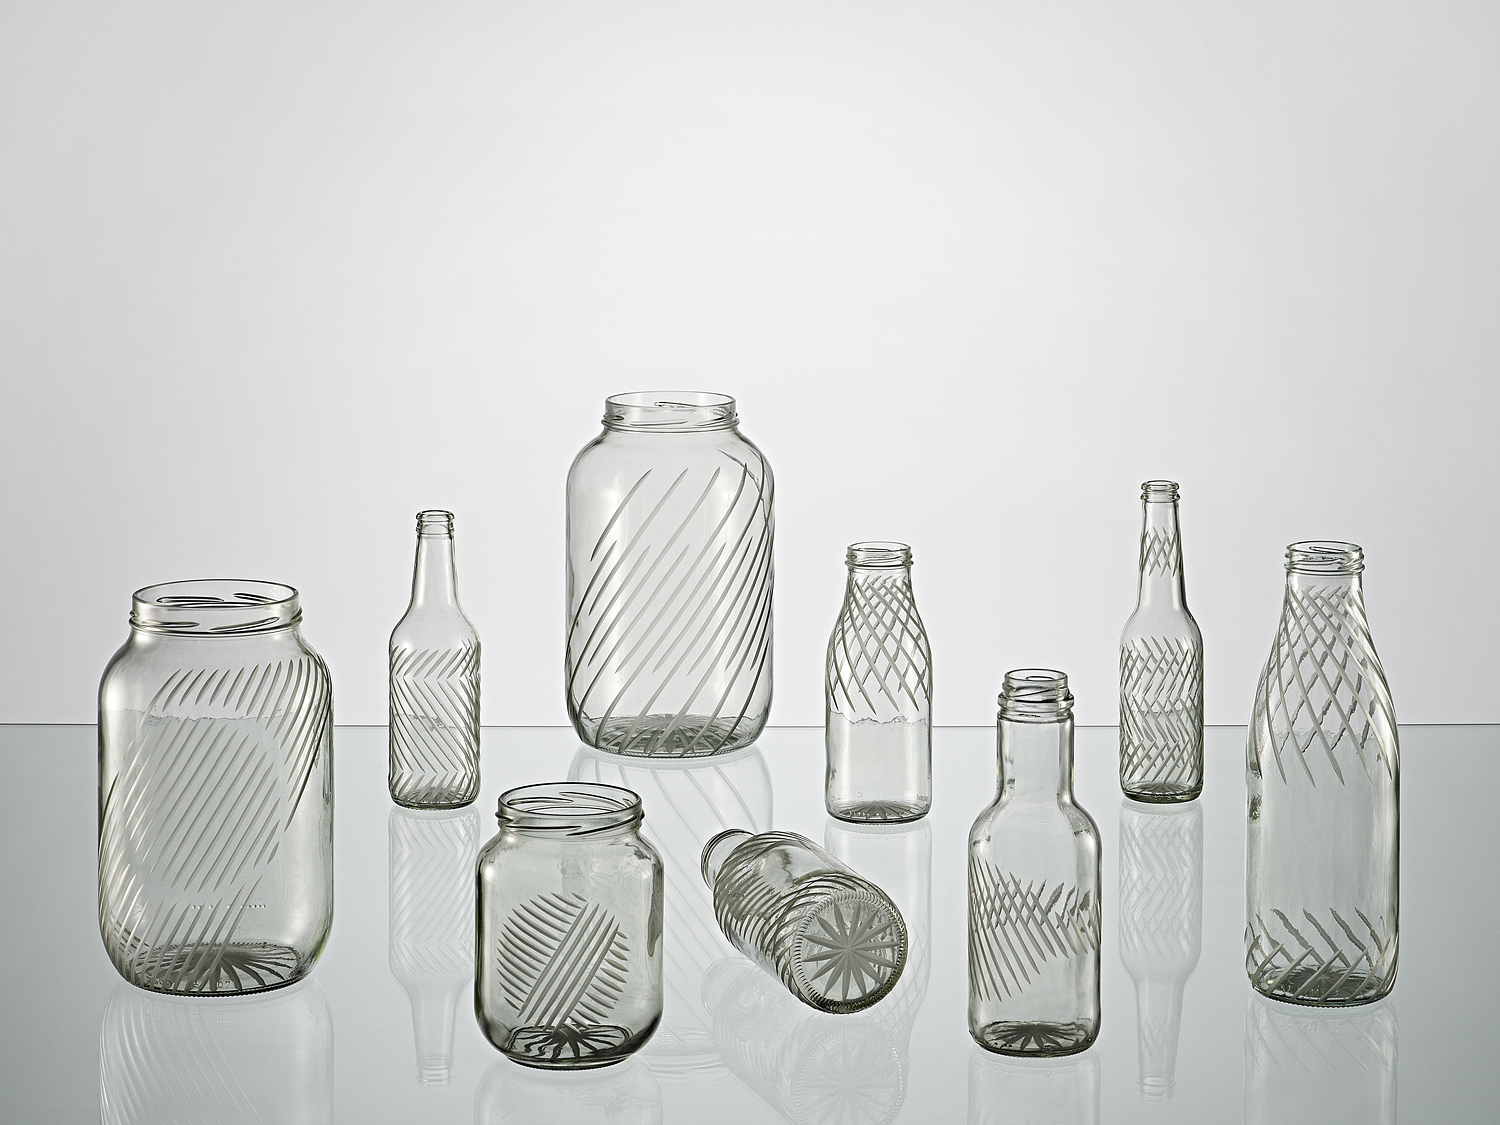 'Cut & Paste' and 'Upgrade', glass collections